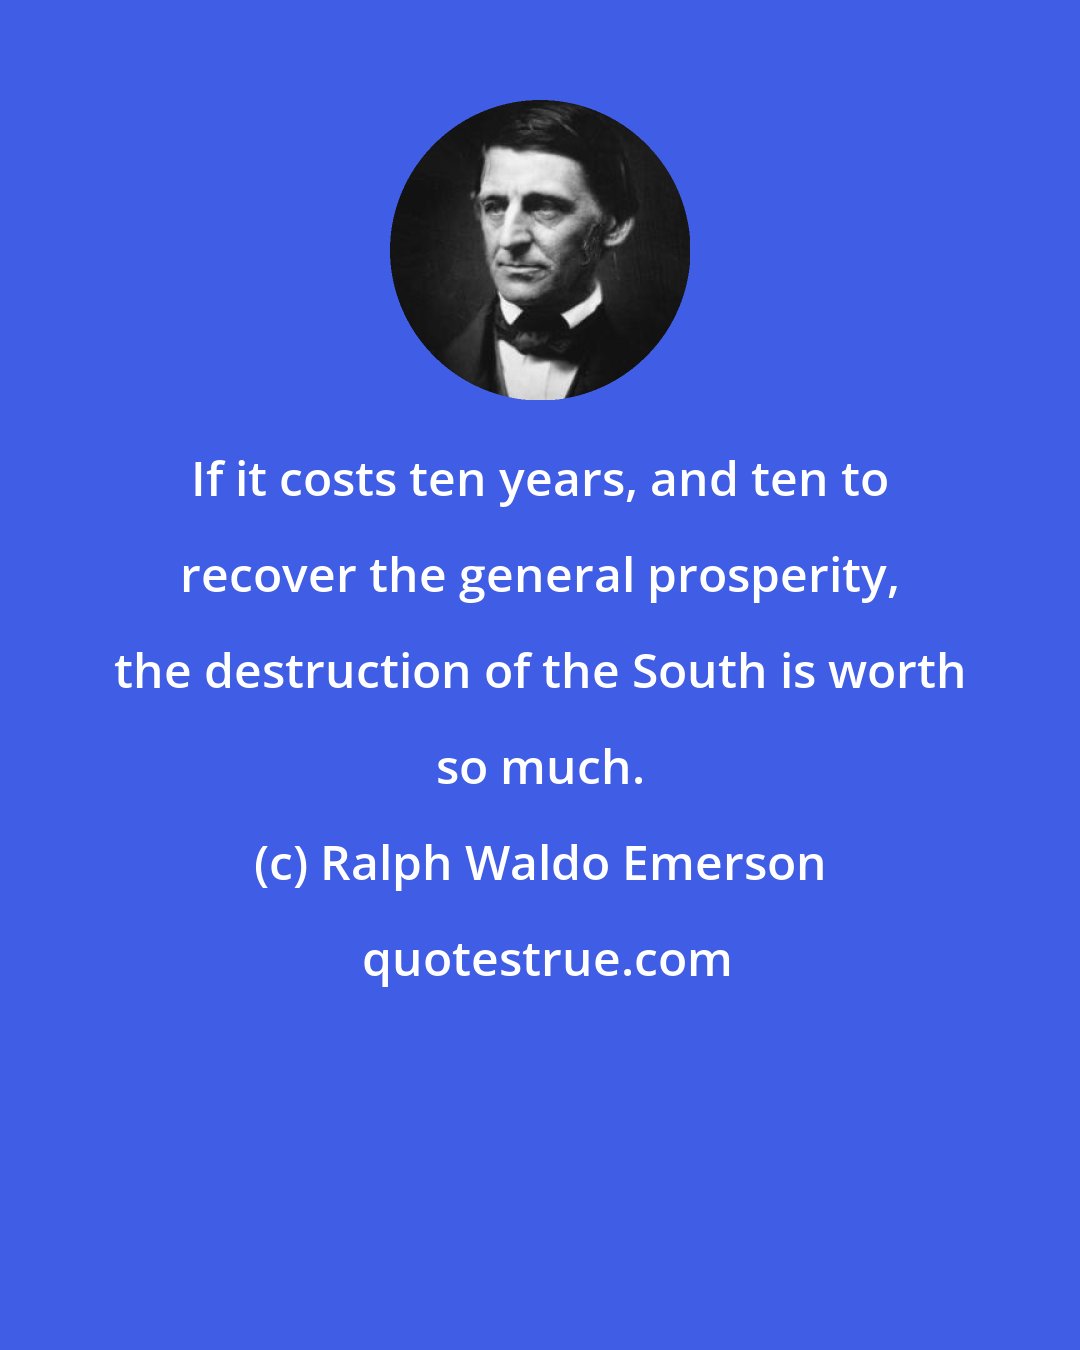 Ralph Waldo Emerson: If it costs ten years, and ten to recover the general prosperity, the destruction of the South is worth so much.